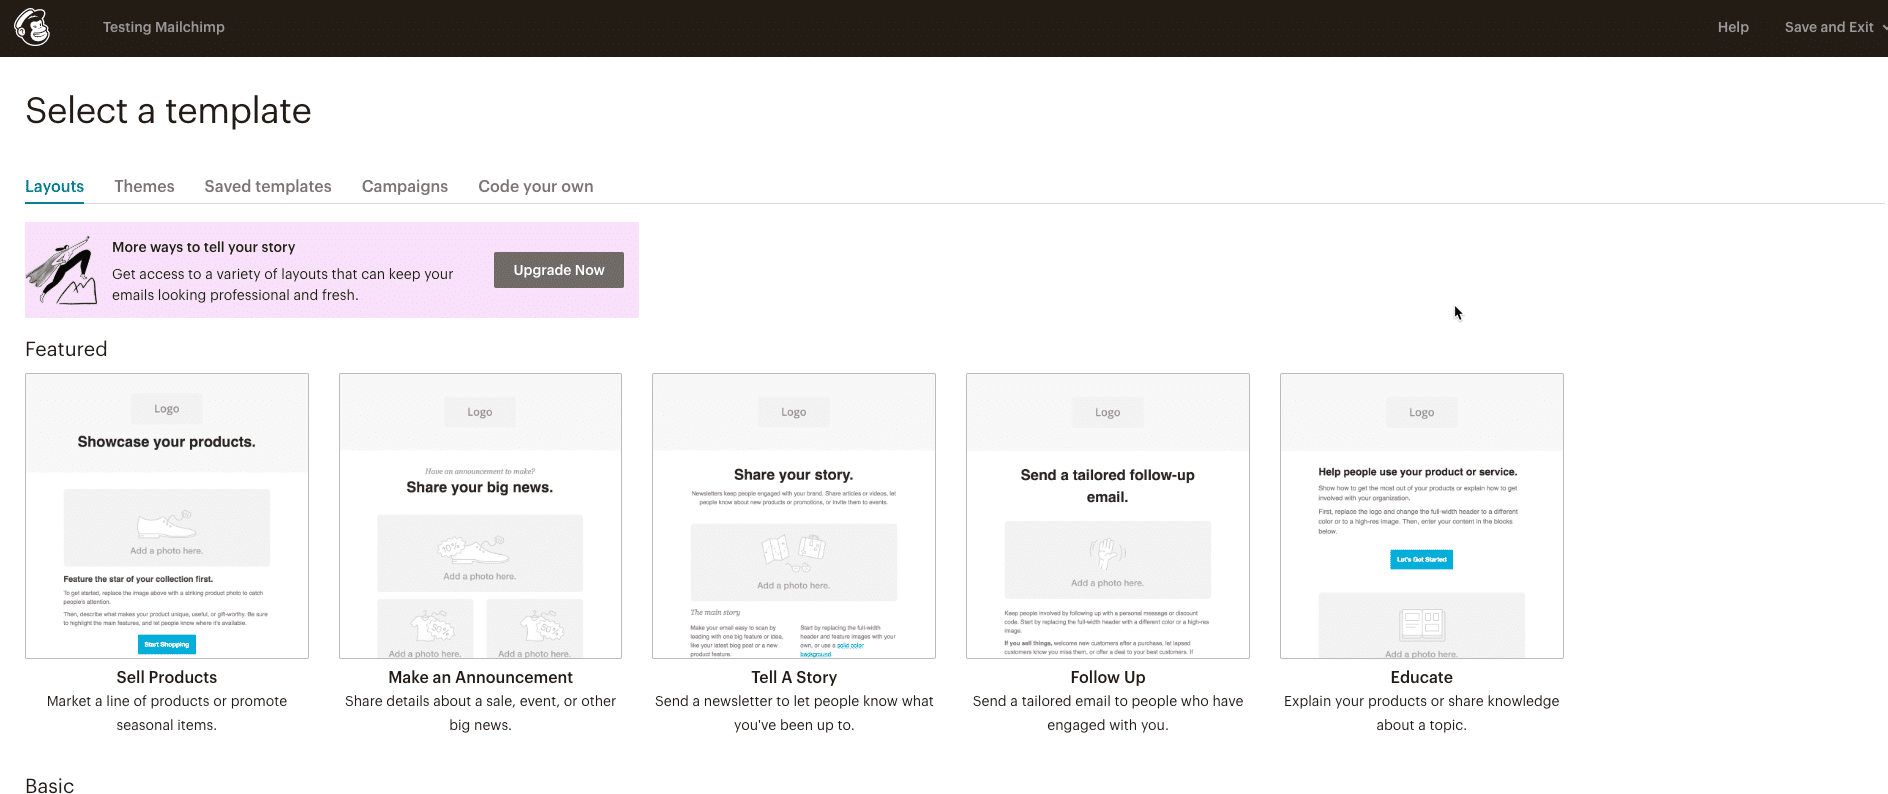 E-mail lay-outs in Mailchimp